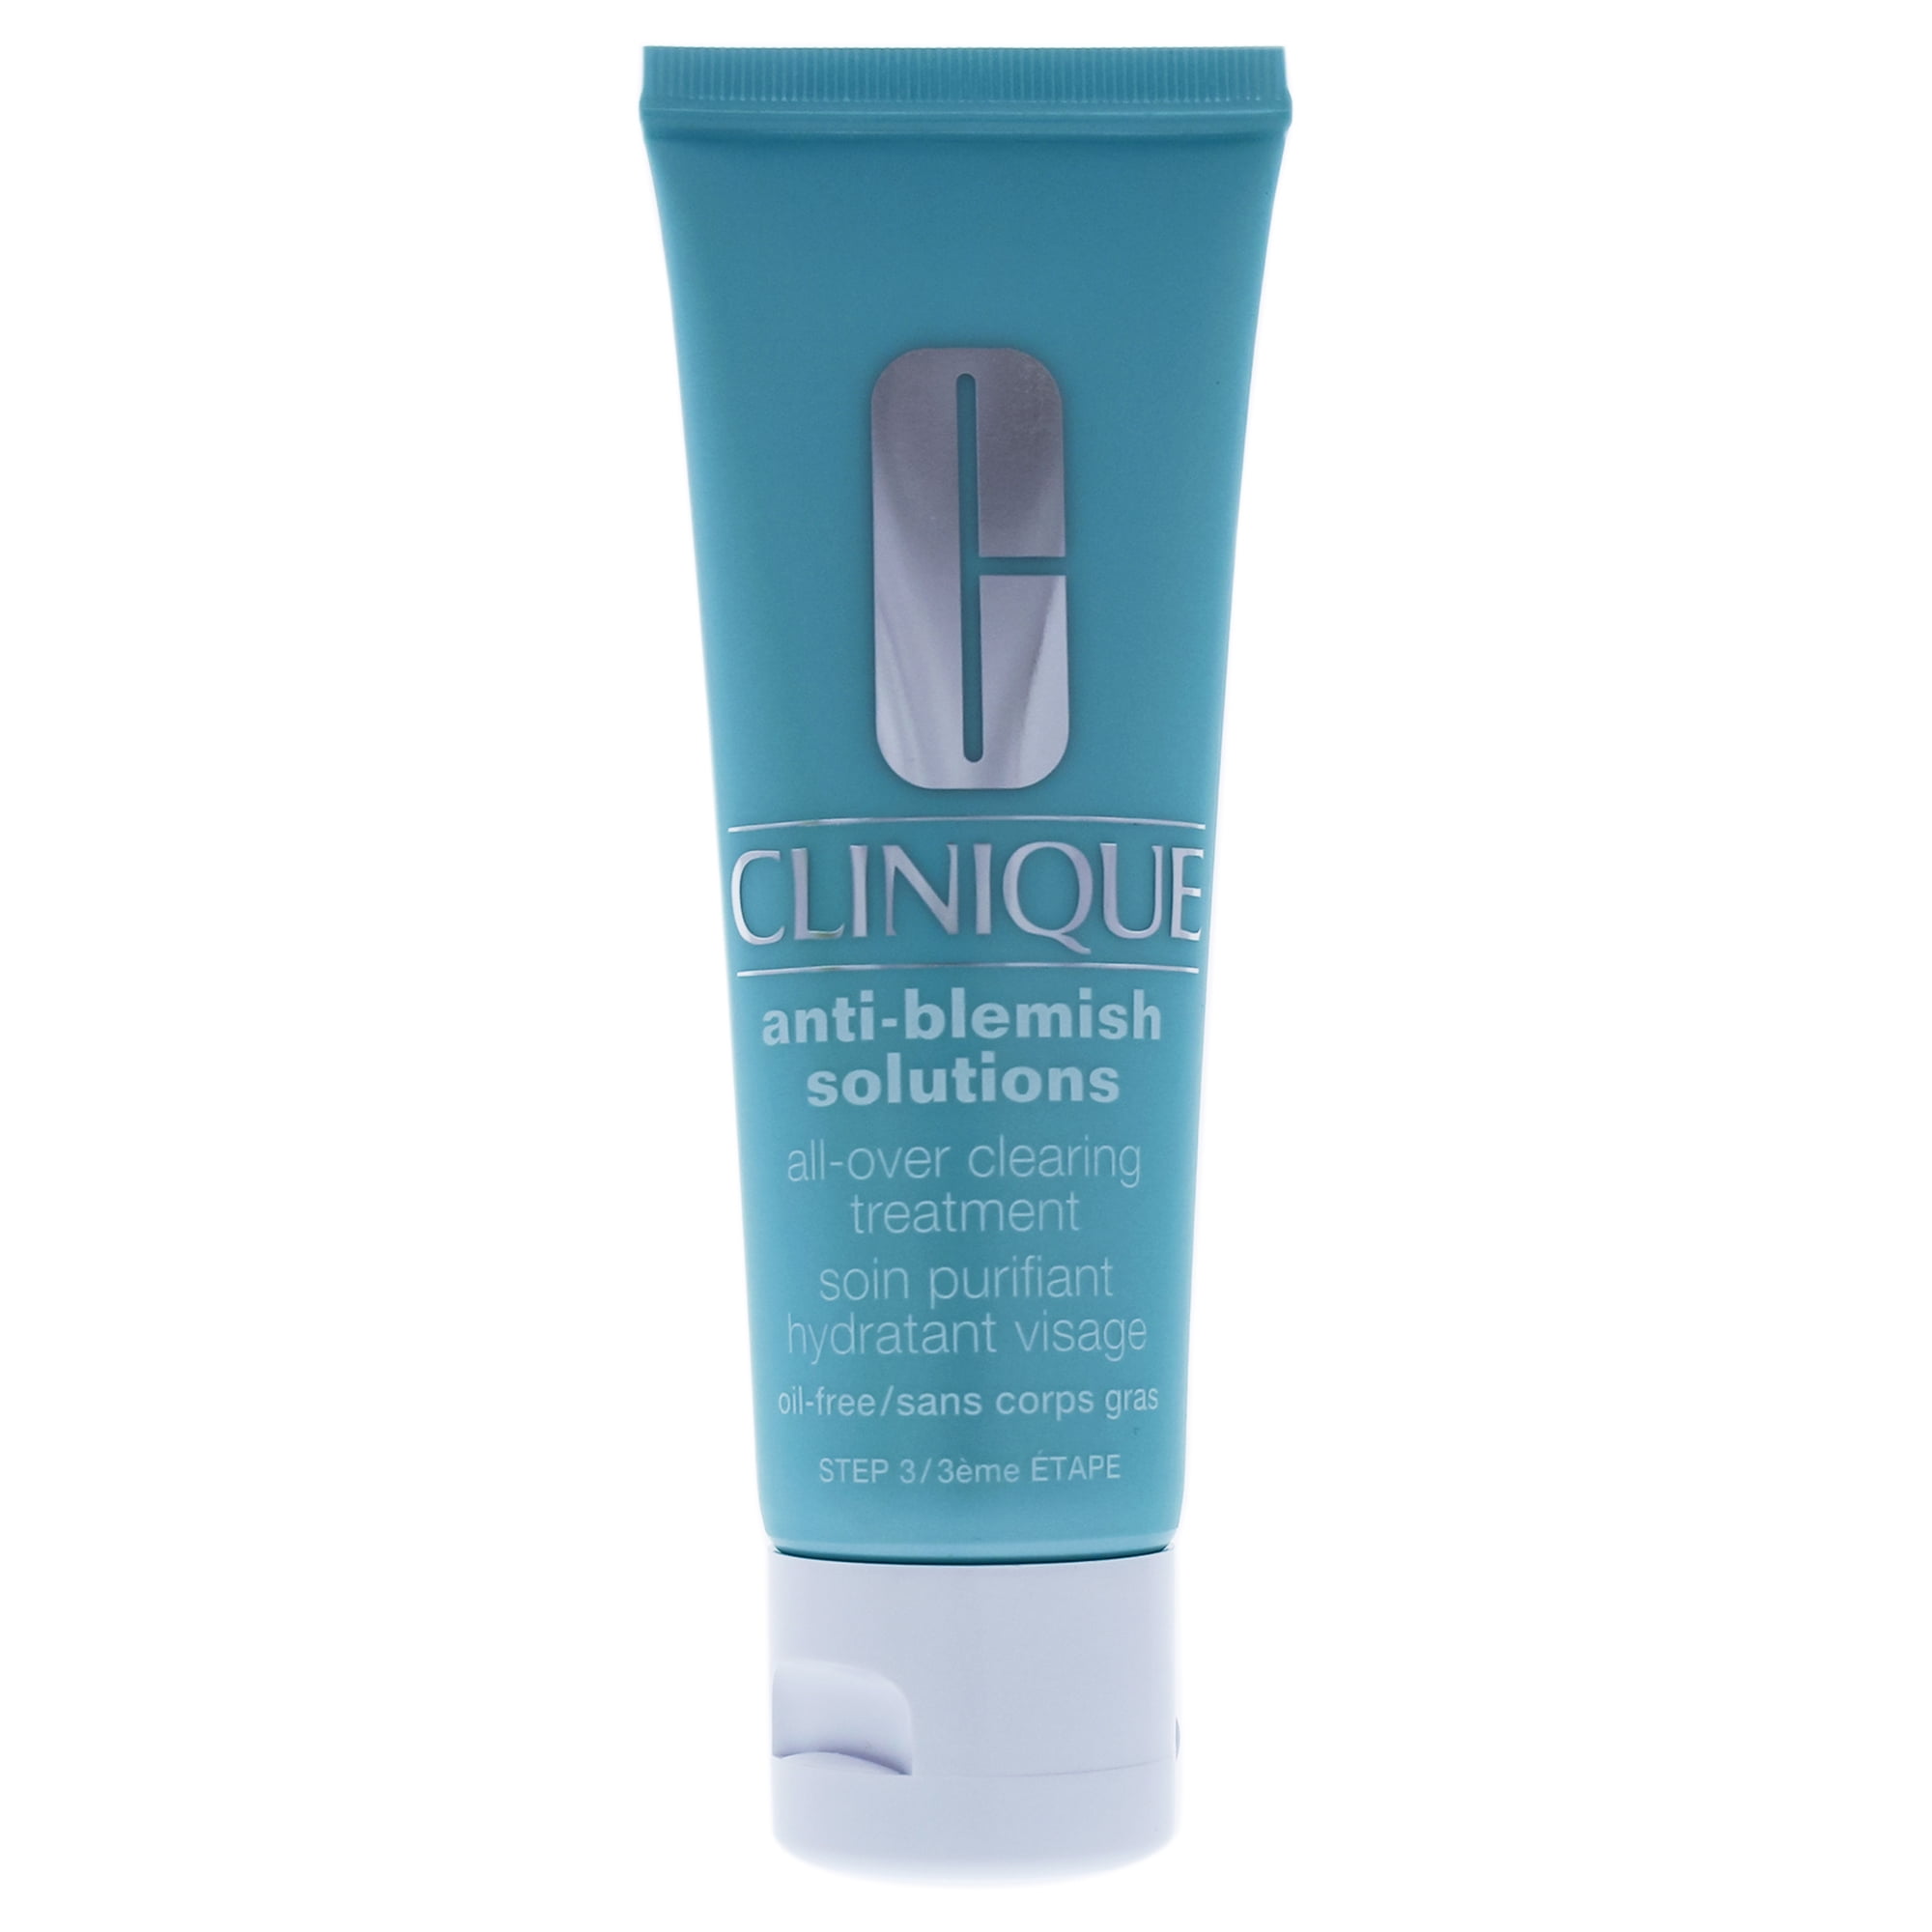 Oz Clearing Acne Treatment, Clinique Fl Solutions All-Over 1.7